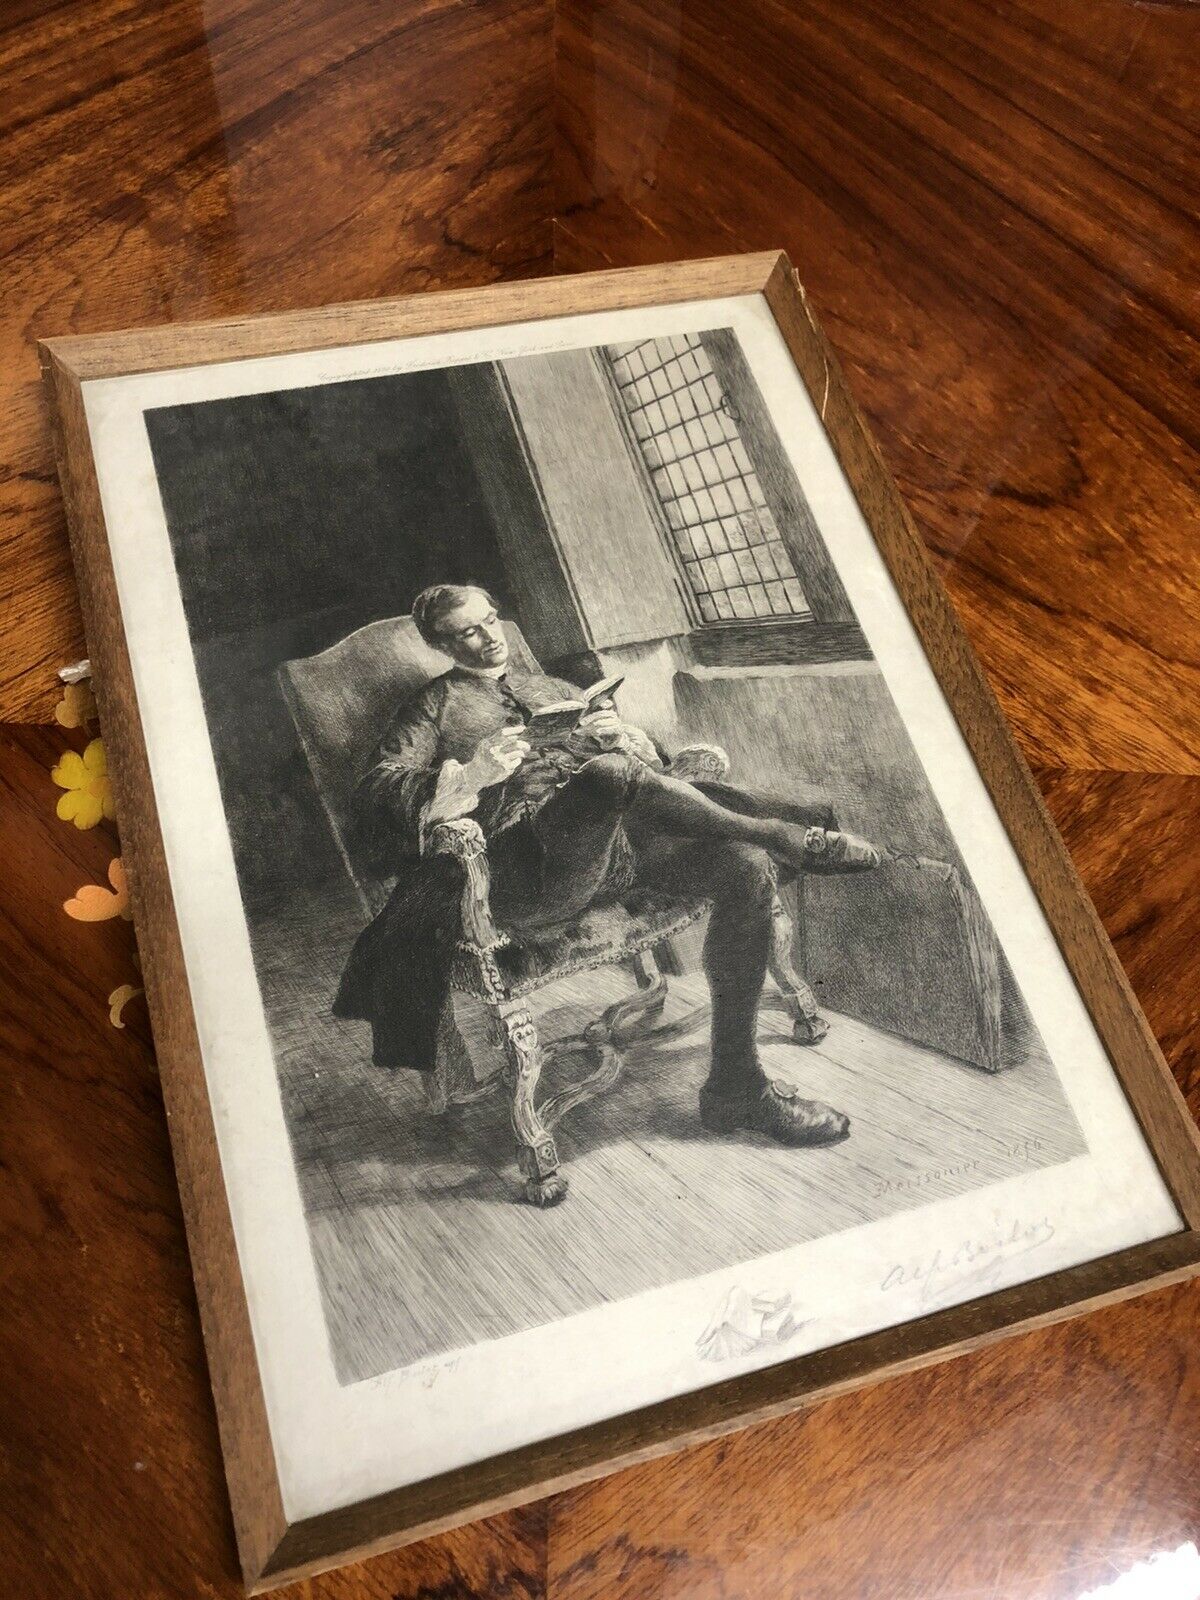 Signed Proof Antique Engraving.